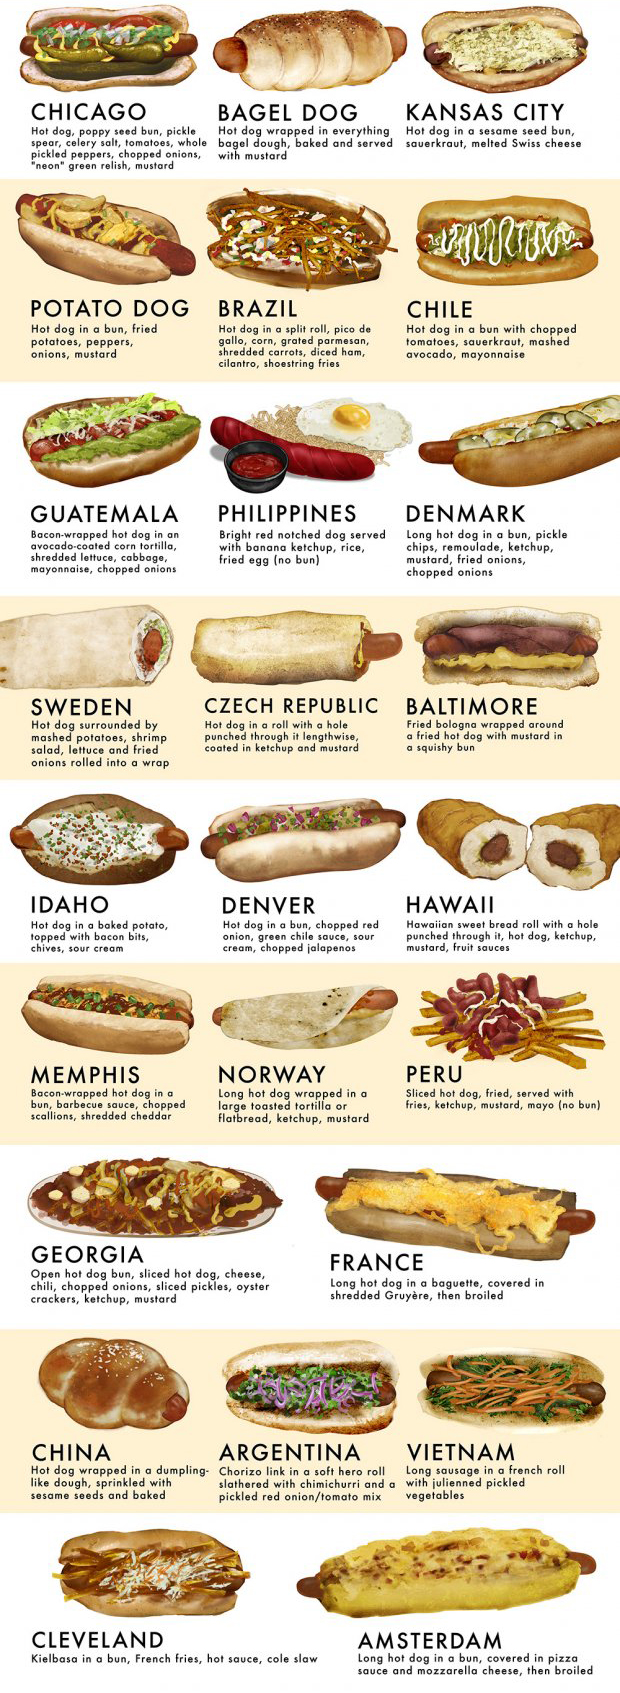 Hot Dog Style Guide